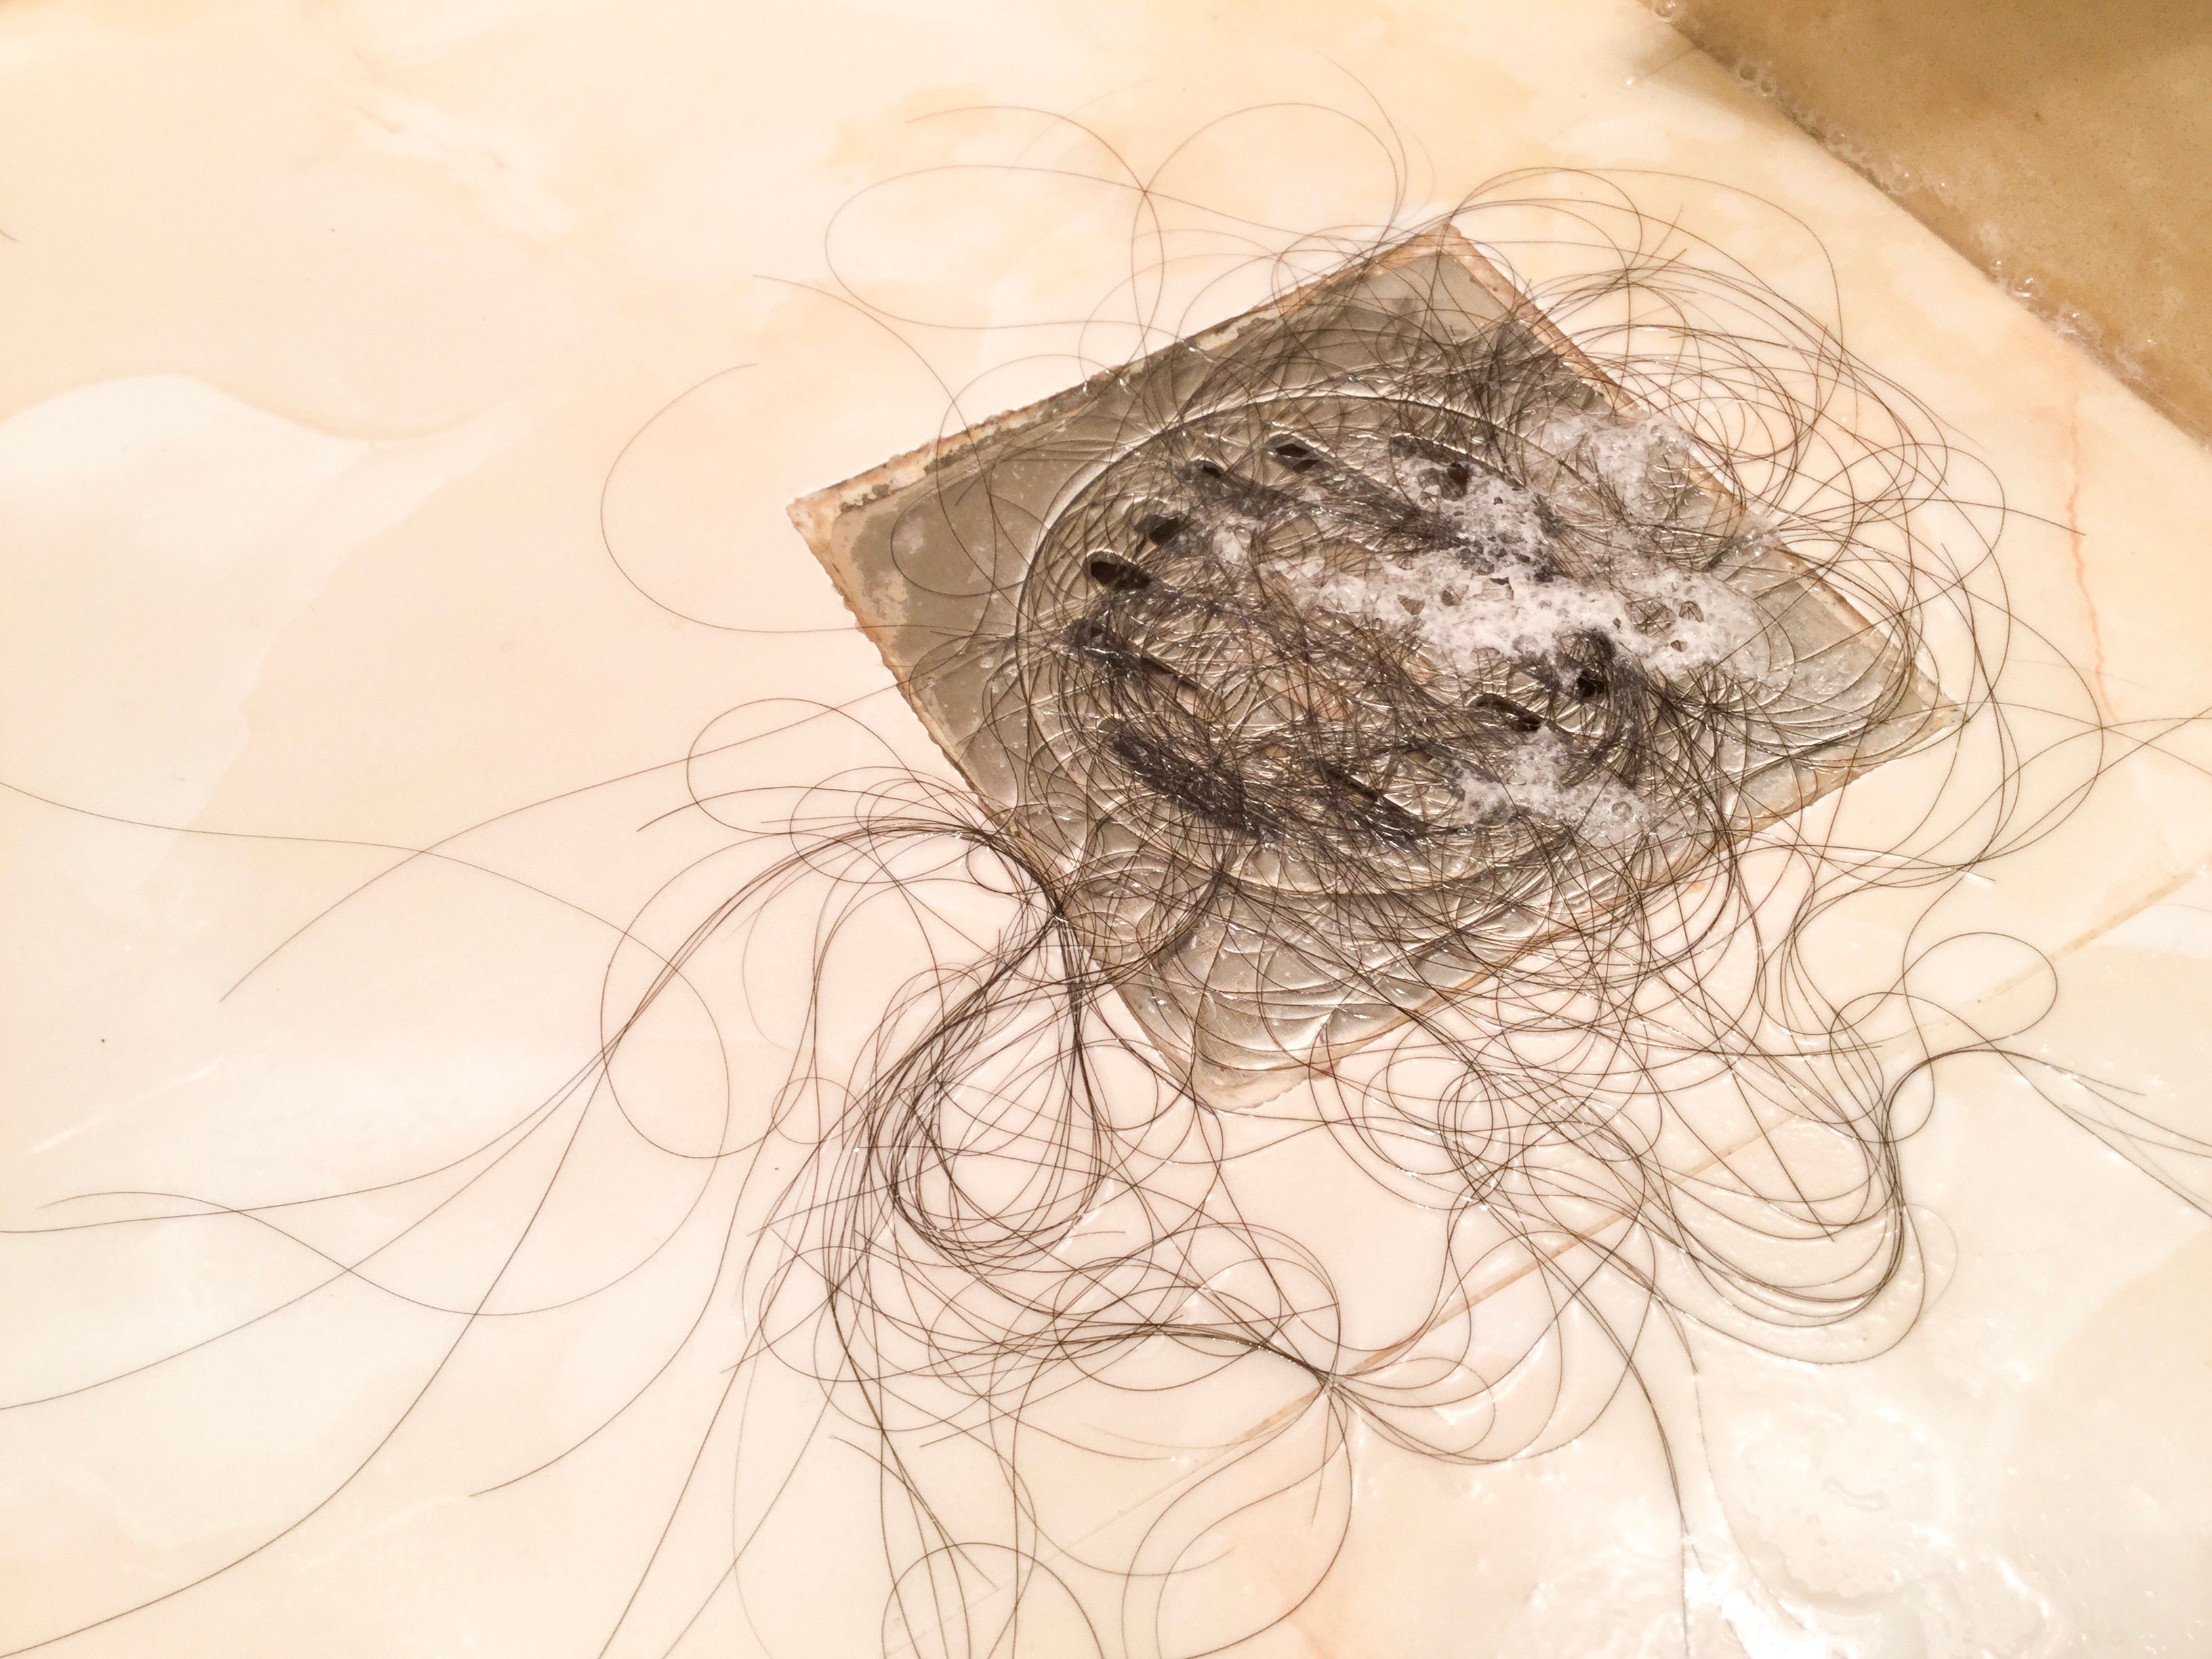 Top 5 Ways to Get Hair Out of Your Drains